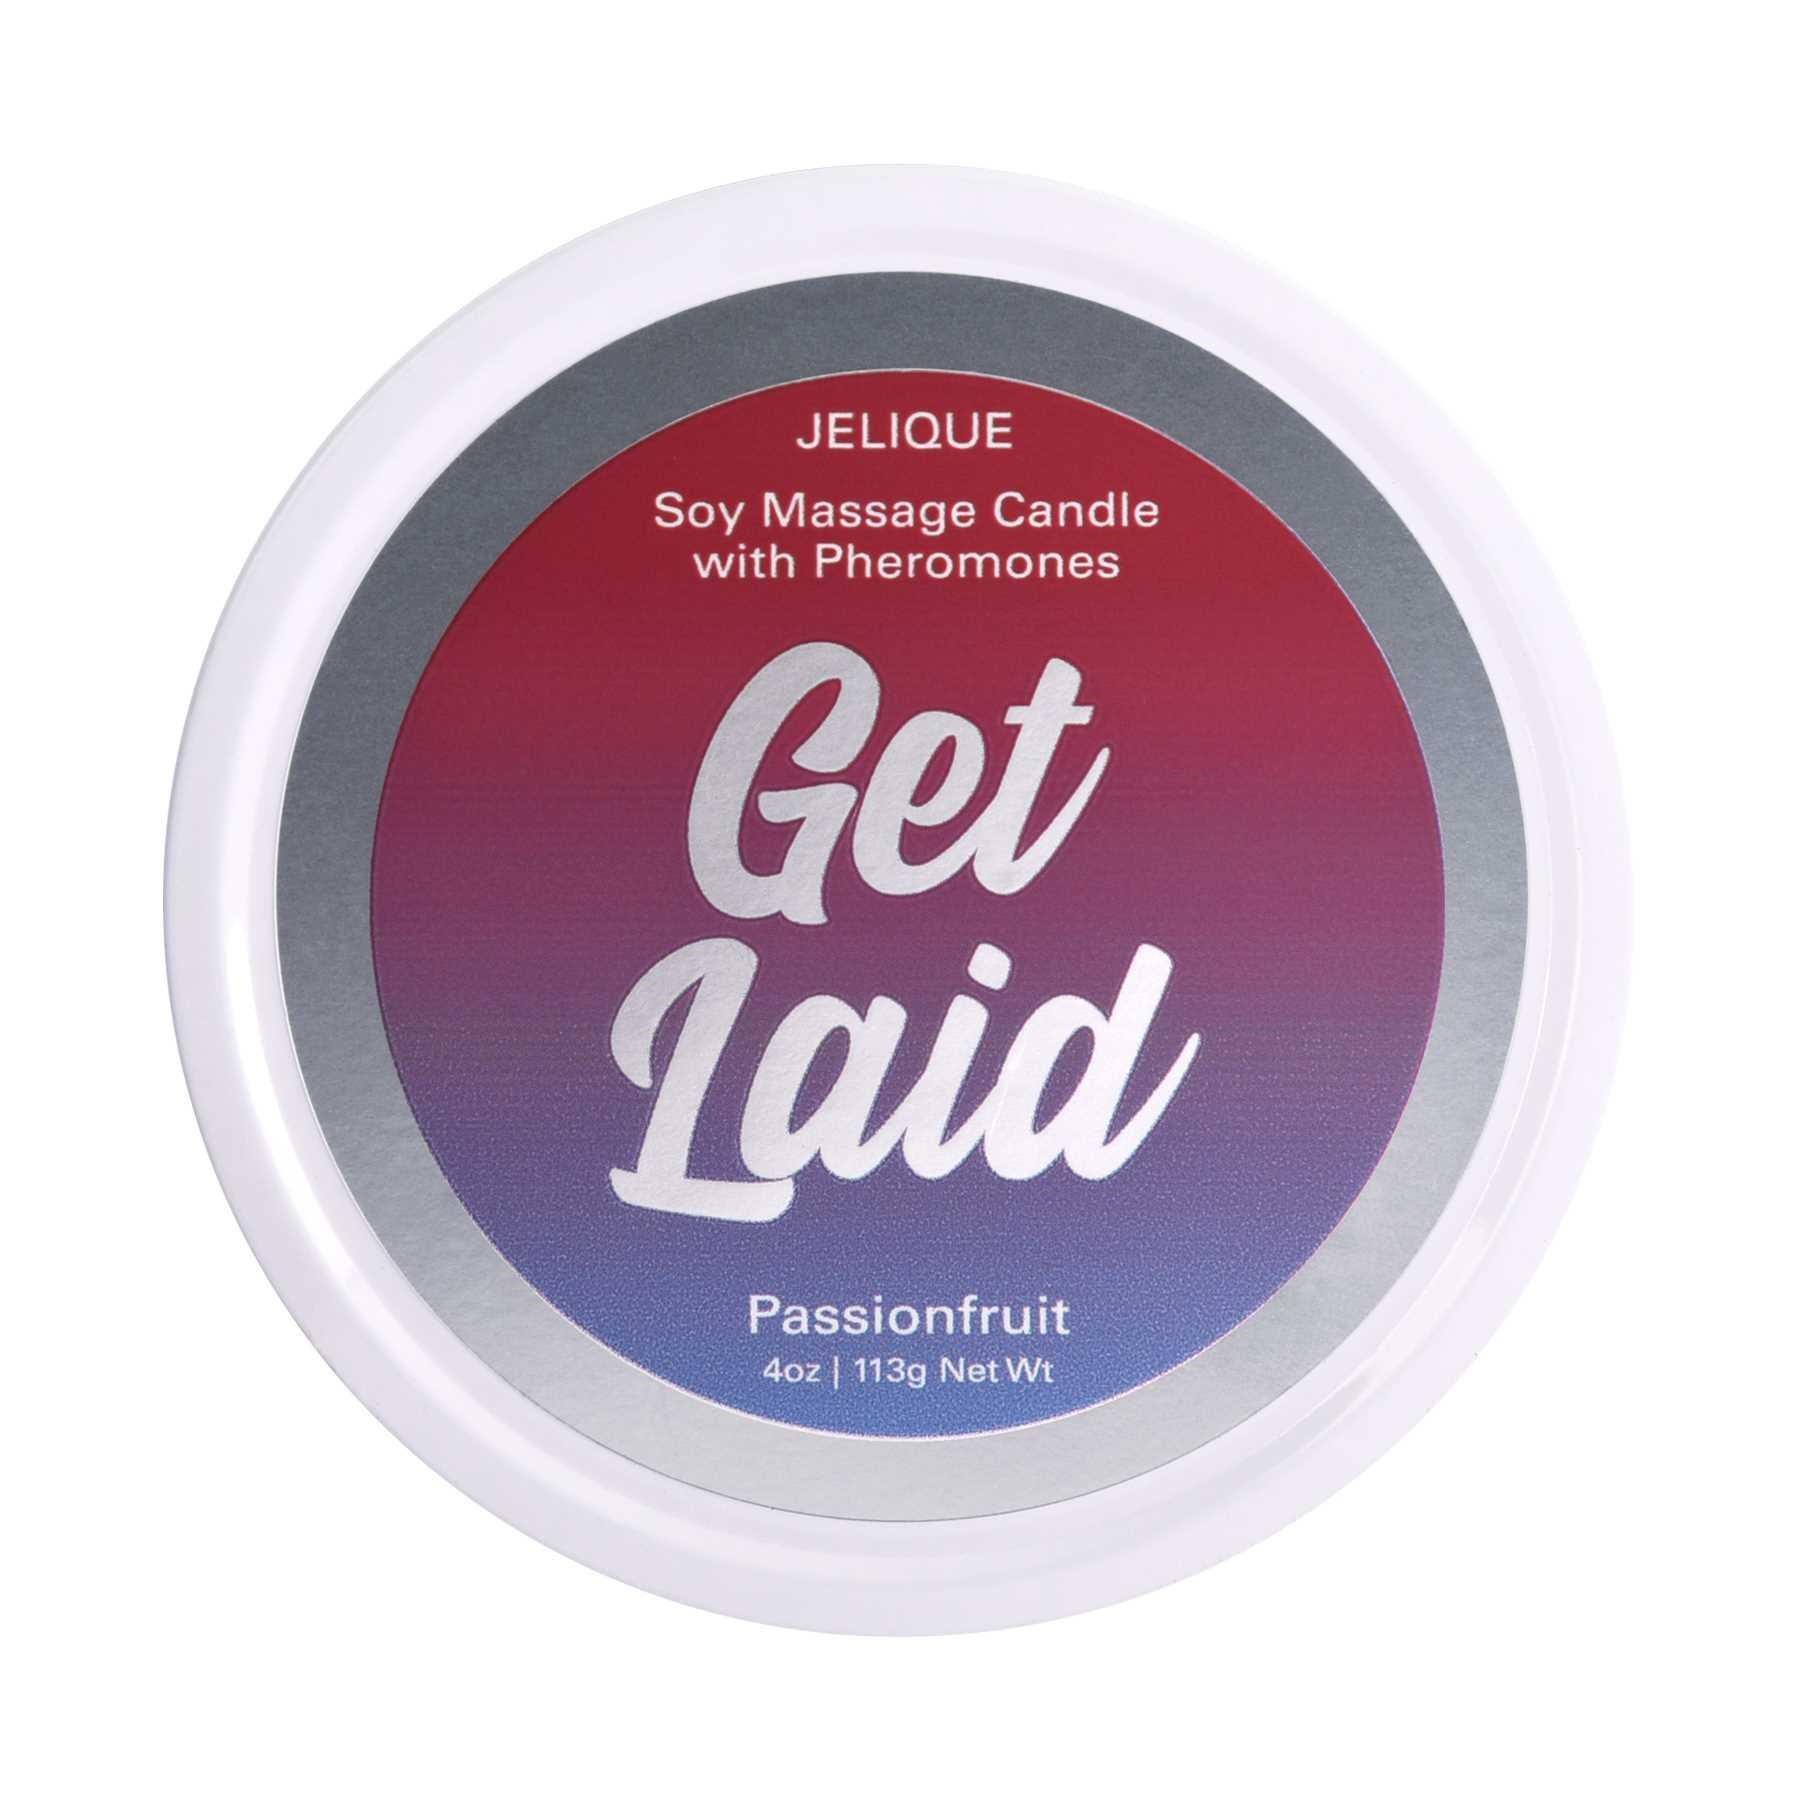 MASSAGE CANDLE WITH PHEROMONES -GET LAID front of tin